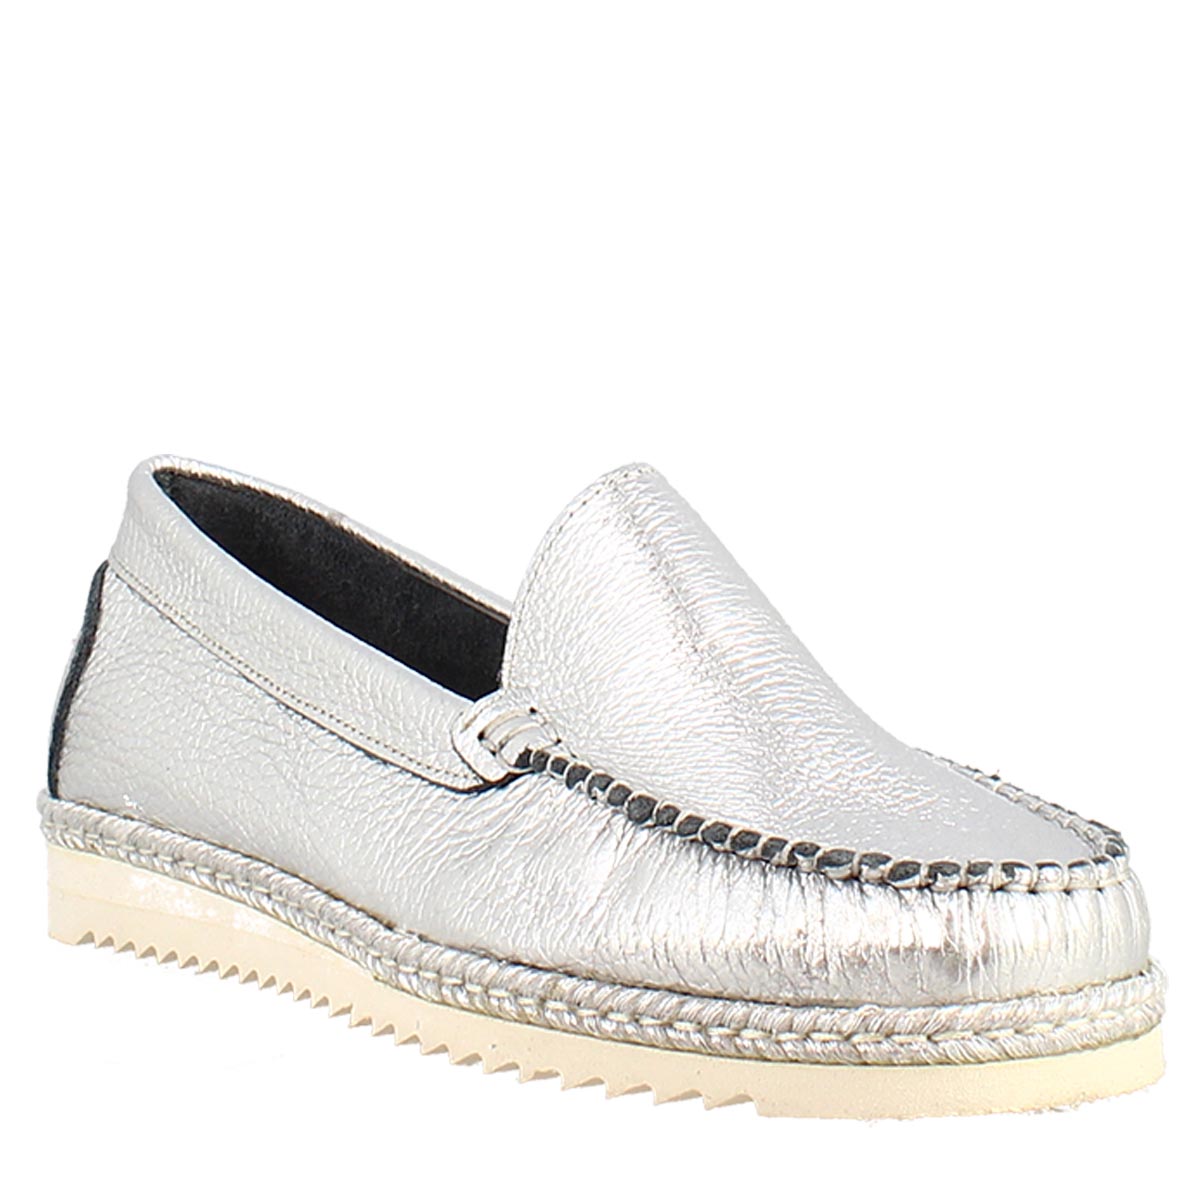 Women's handmade round toe loafers in silver leather 